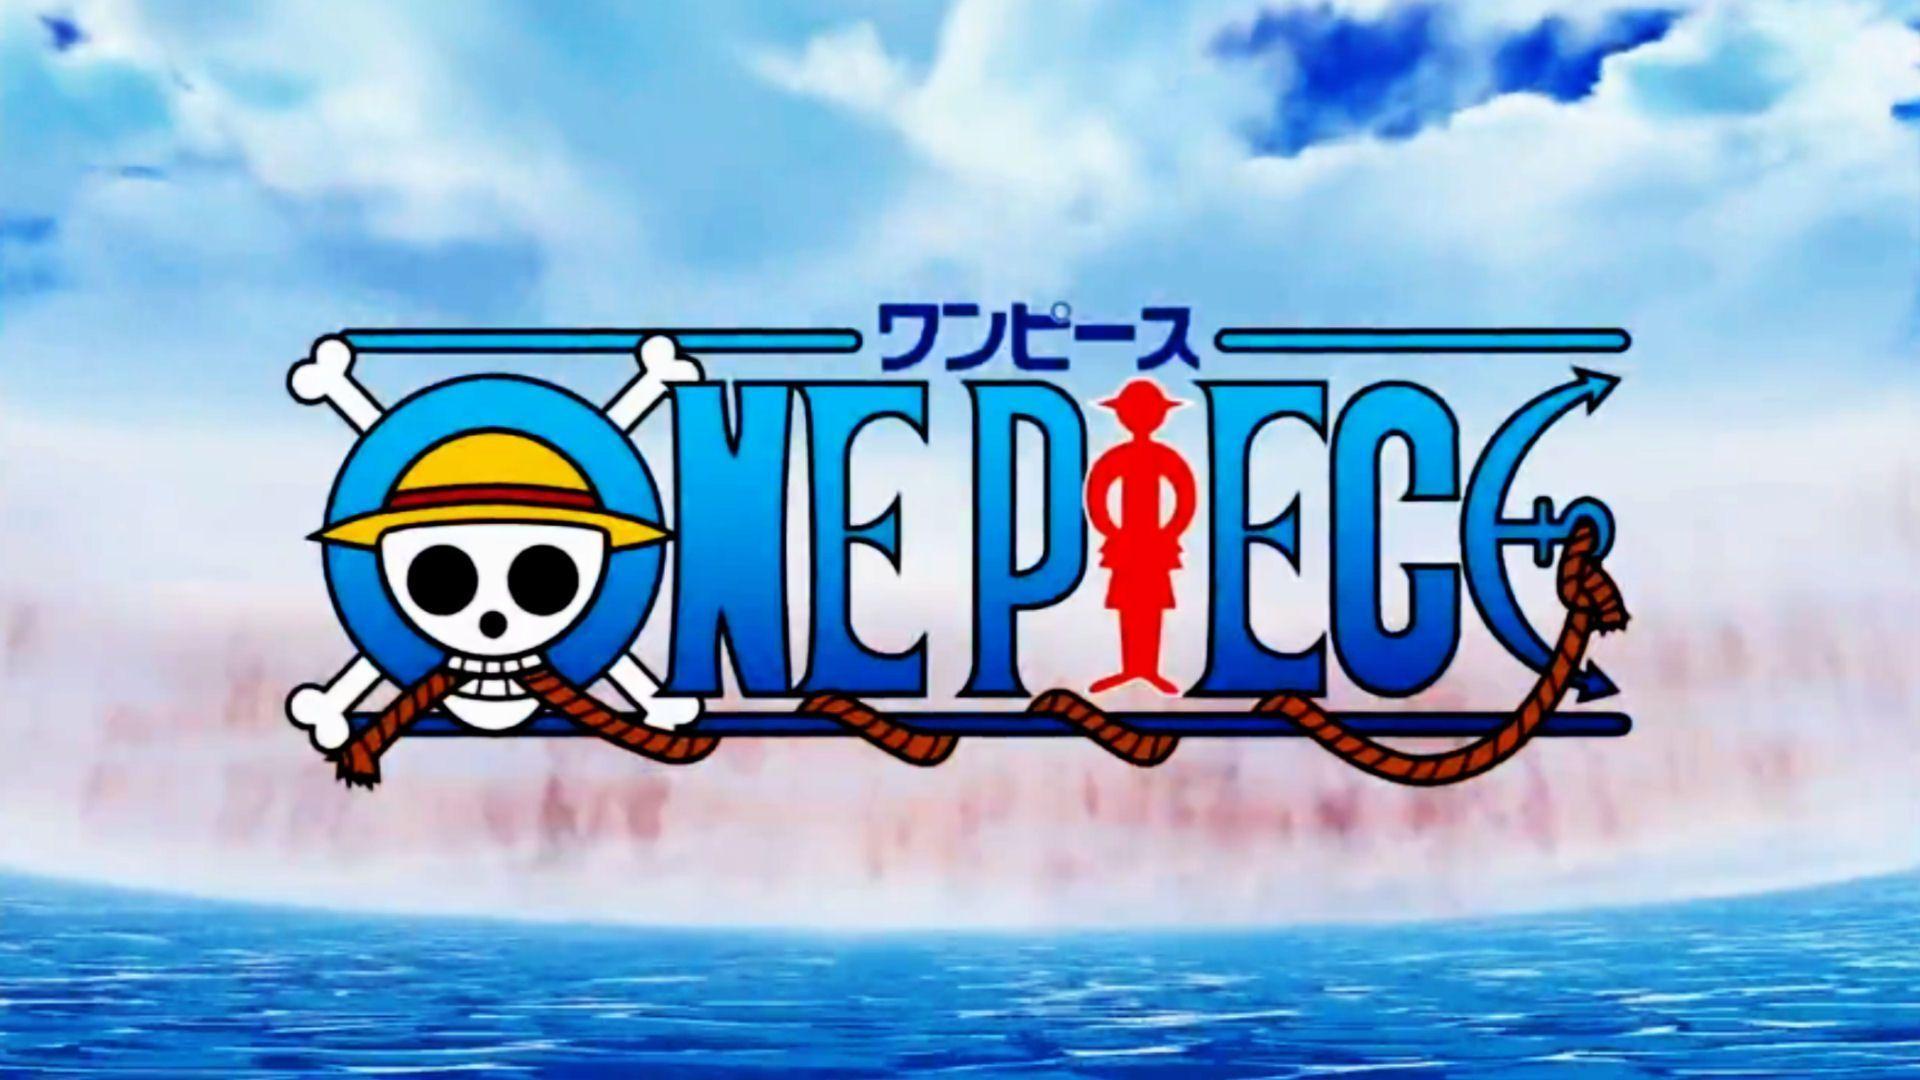 One Piece Hd wallpapers 21895